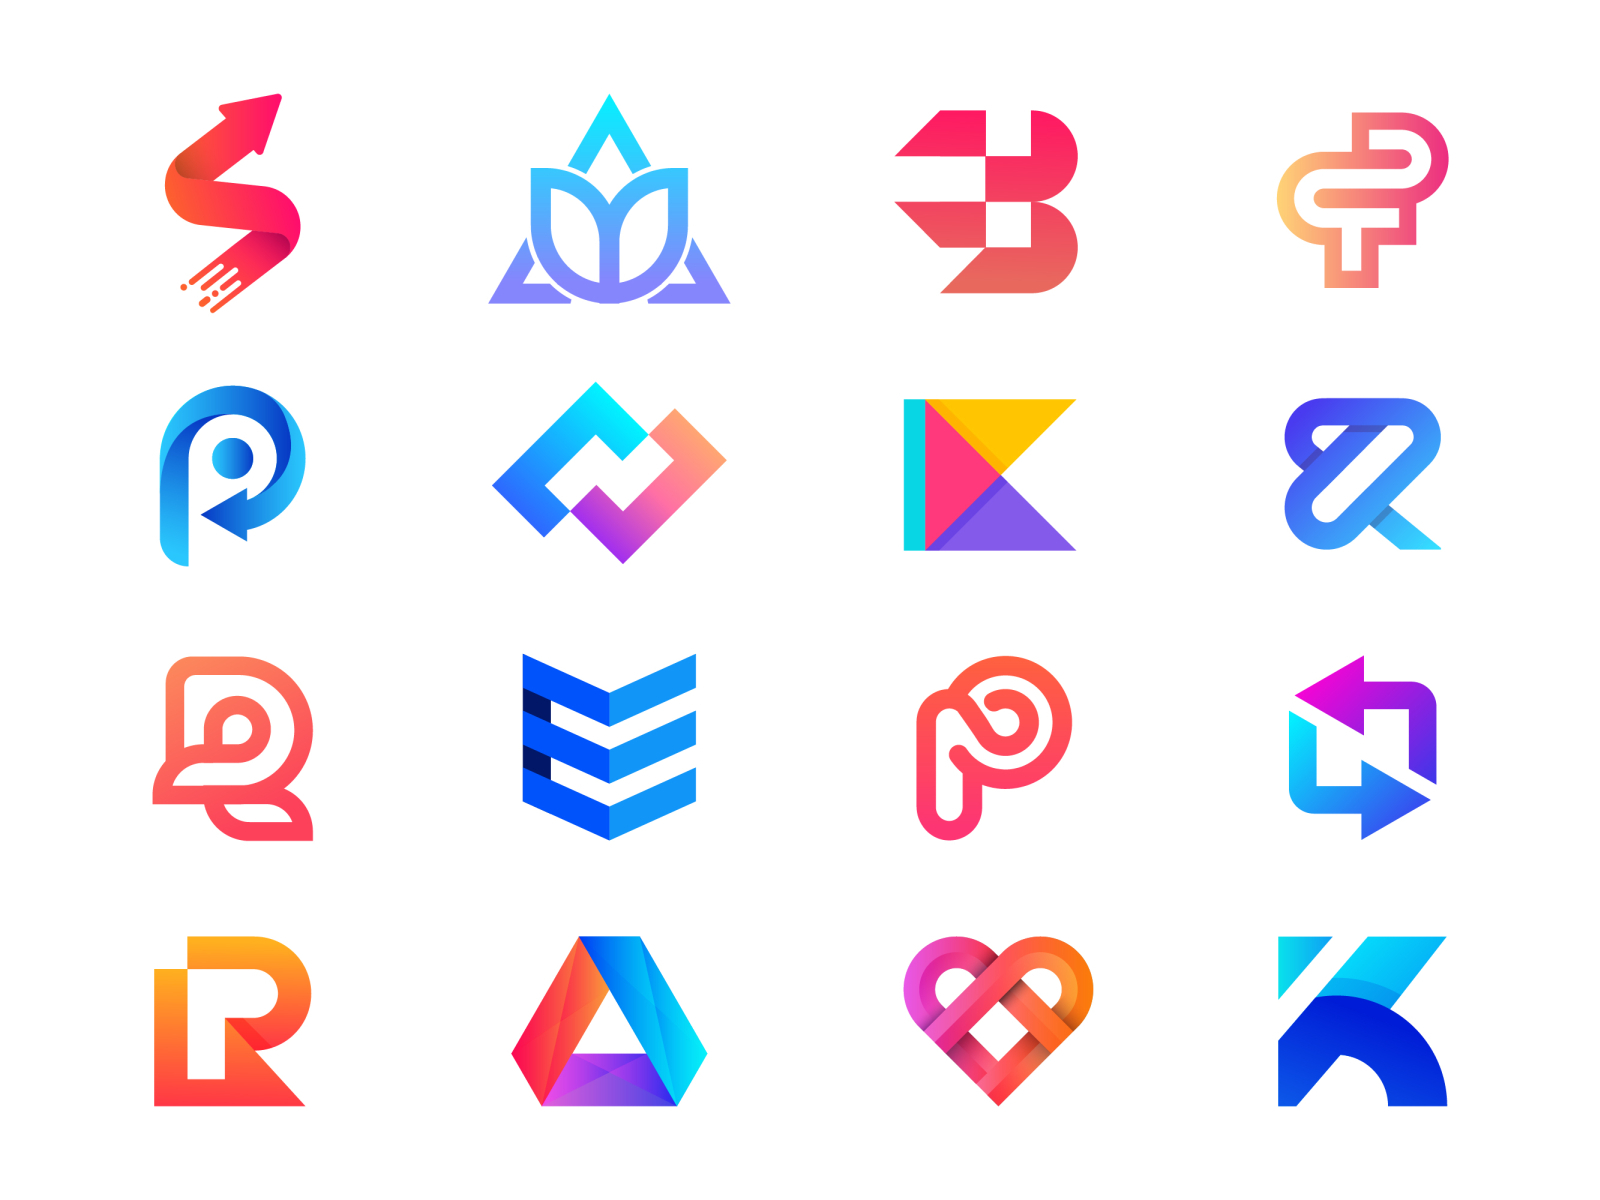 Unused logo design icon collection by Sobuj Hasan on Dribbble